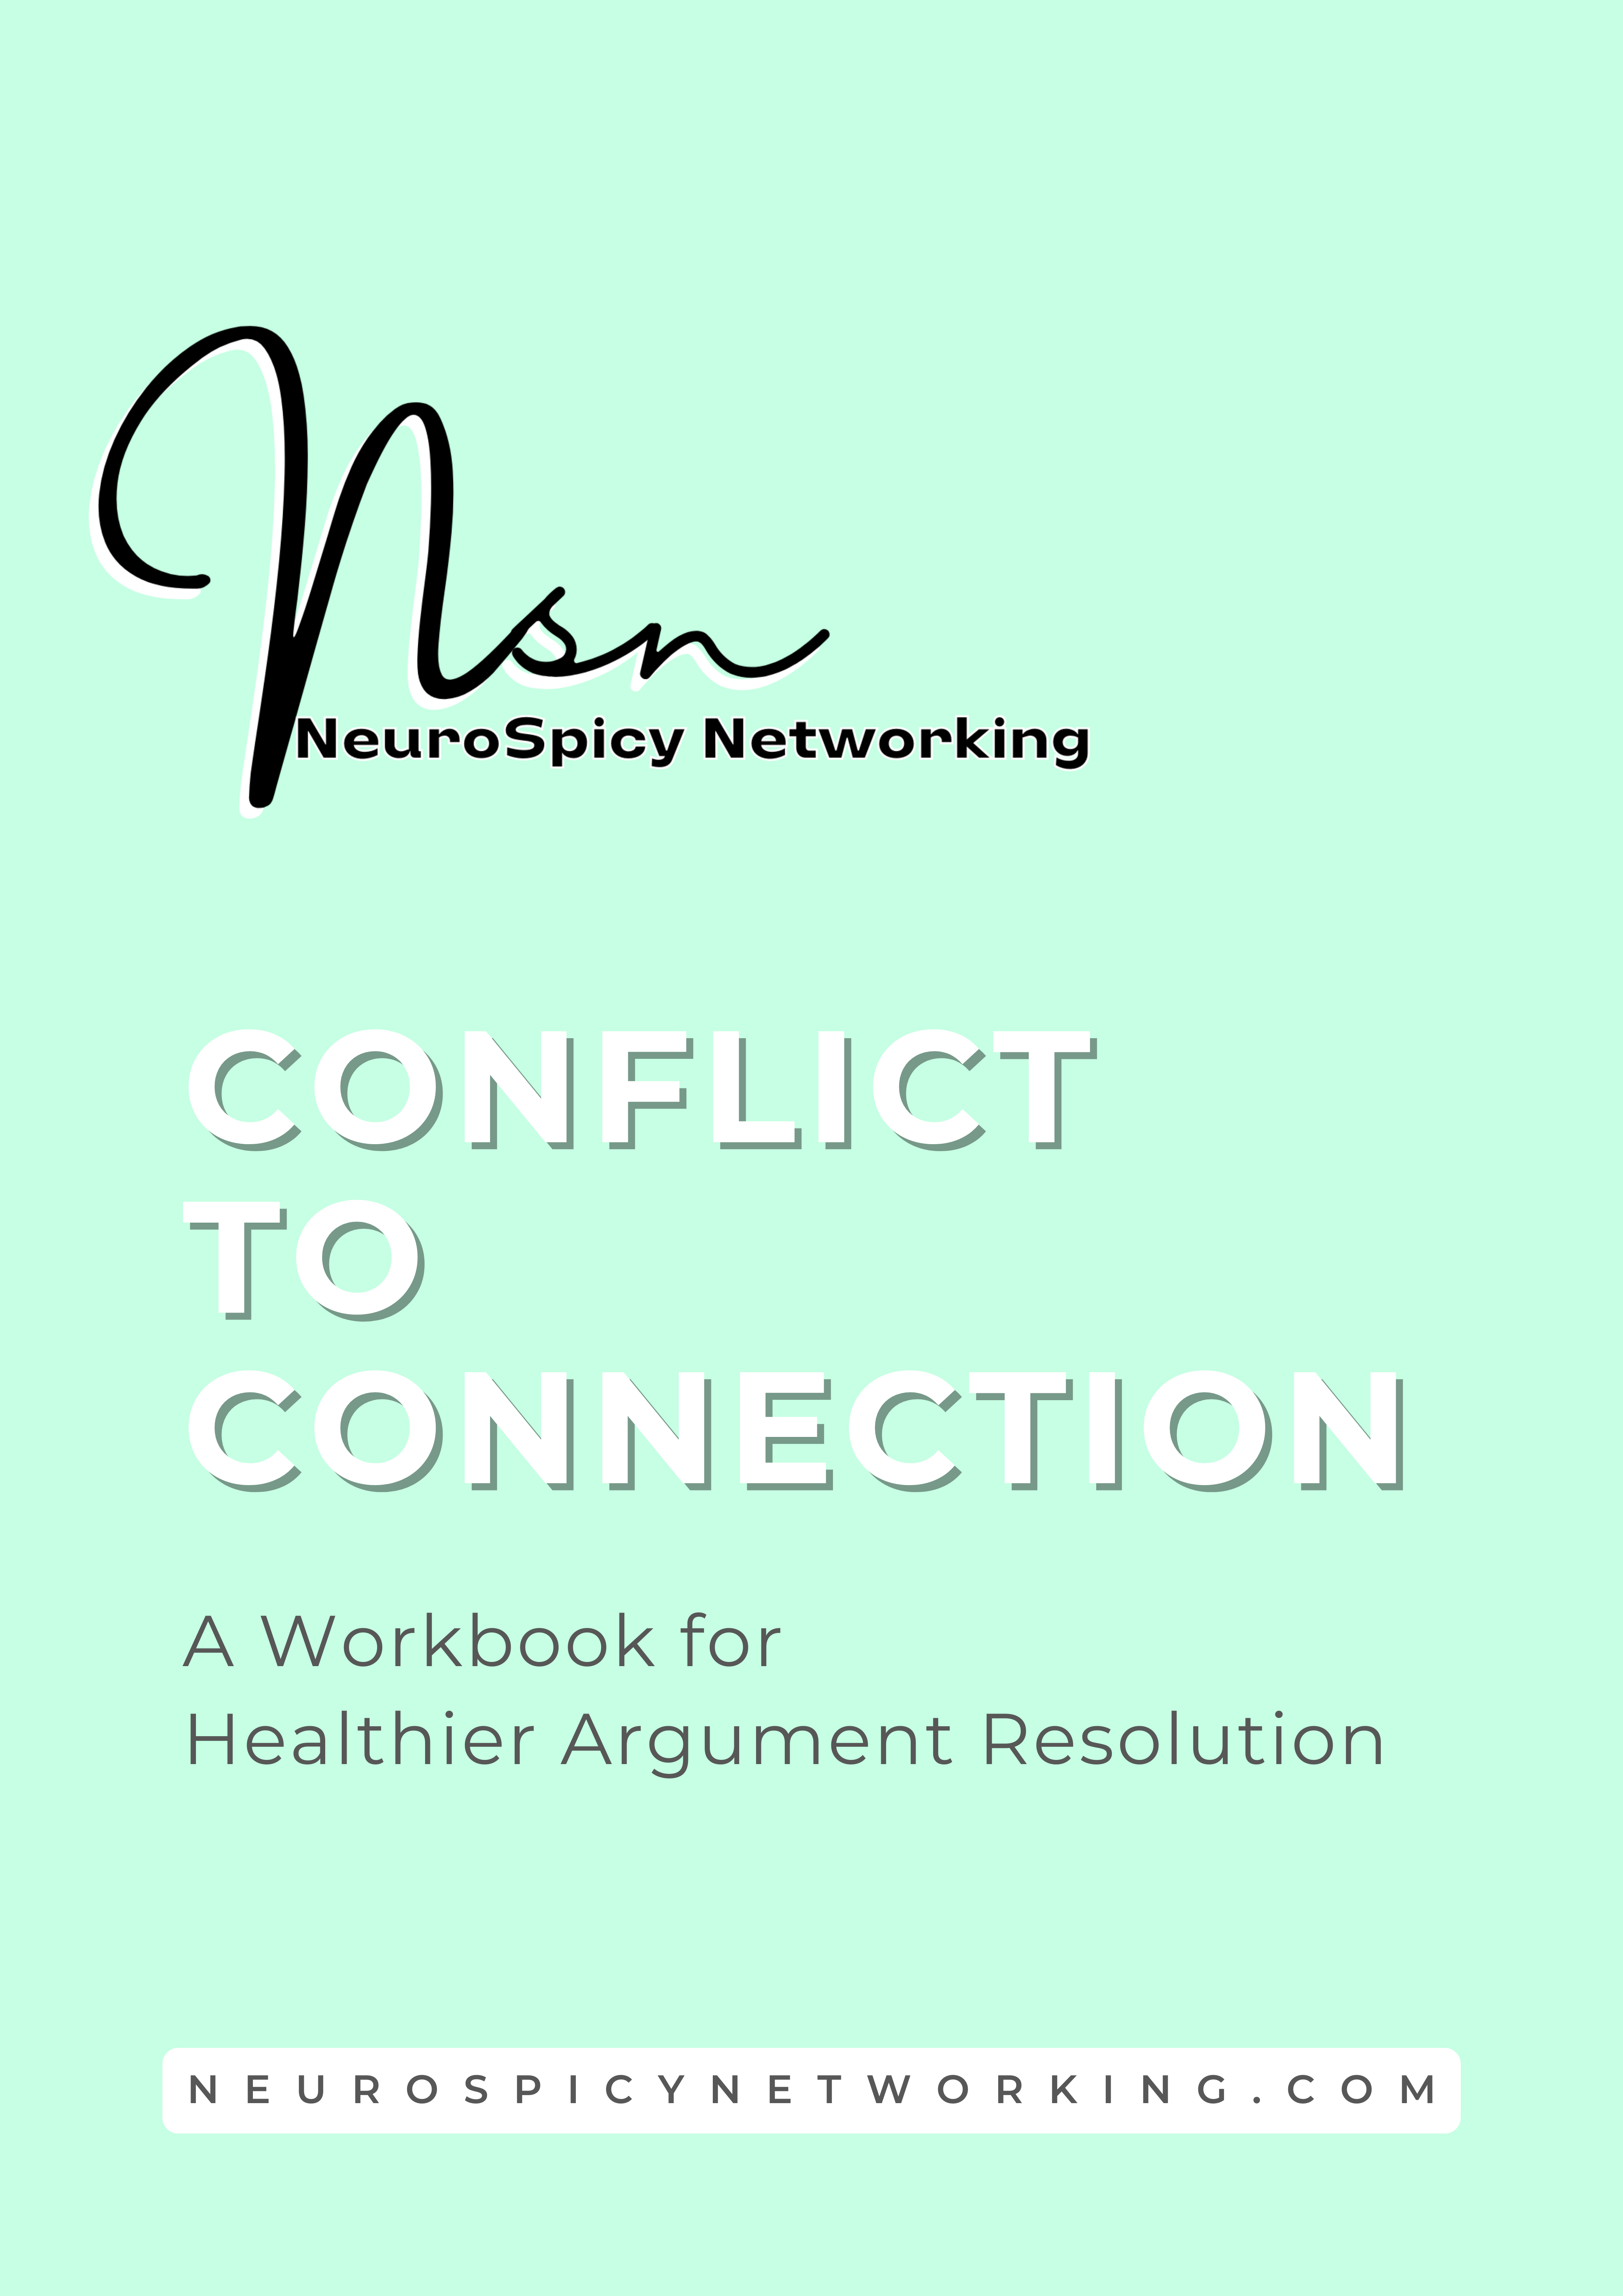 Title page of workbook mint green background with black and white text. Conflict to Connection: A Workbook for Healthier Argument Resolution NeuroSpicyNetworking.com